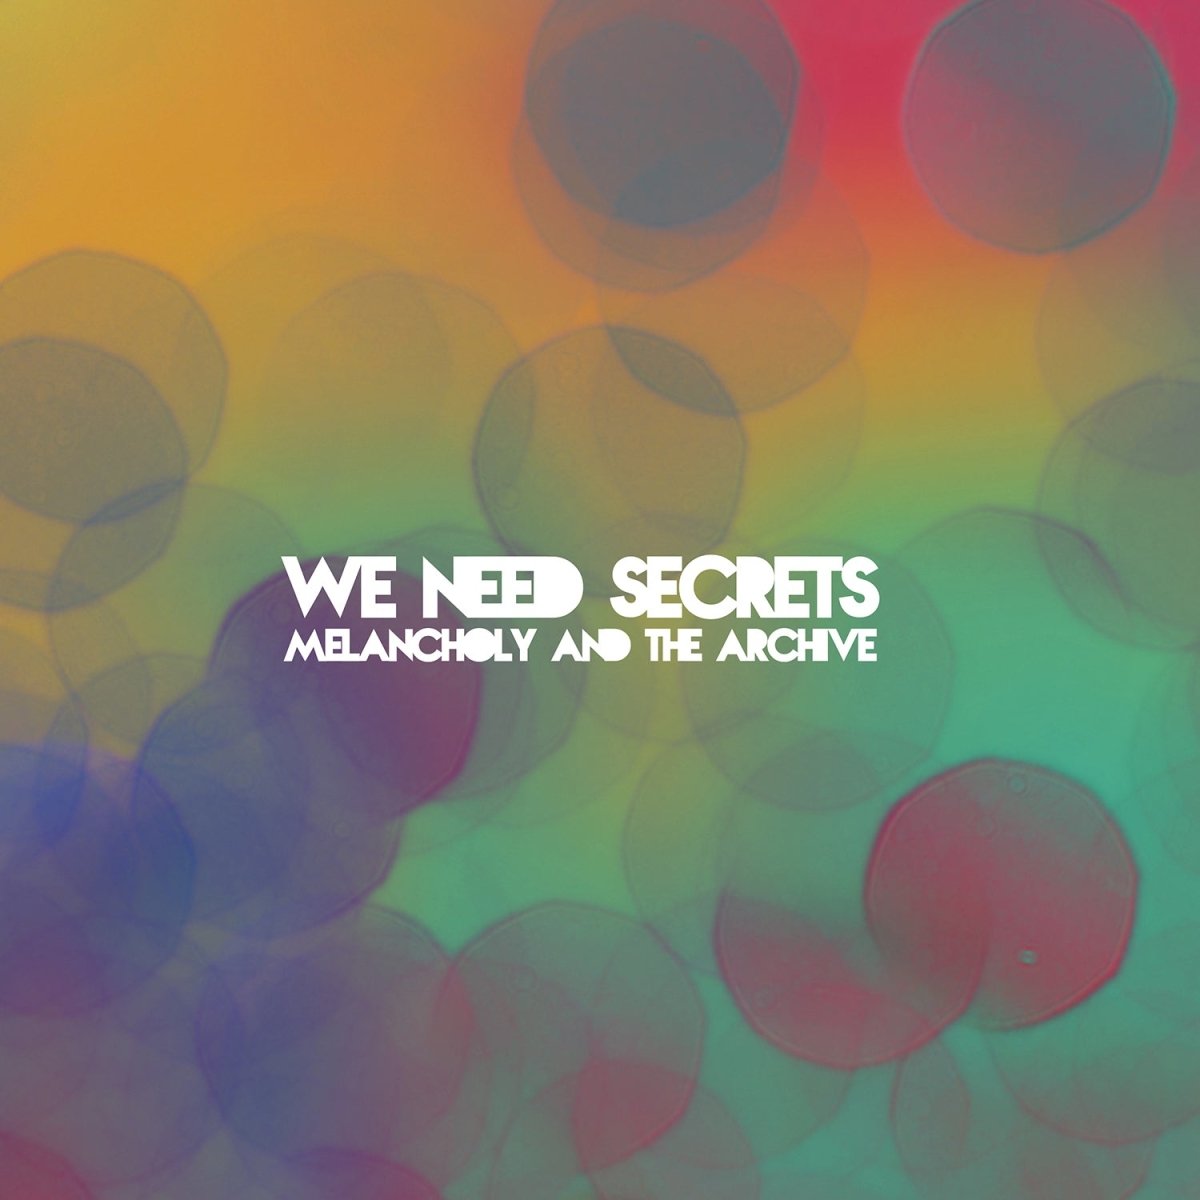 We Need Secrets - Melancholy And The Archive Music CDs Vinyl